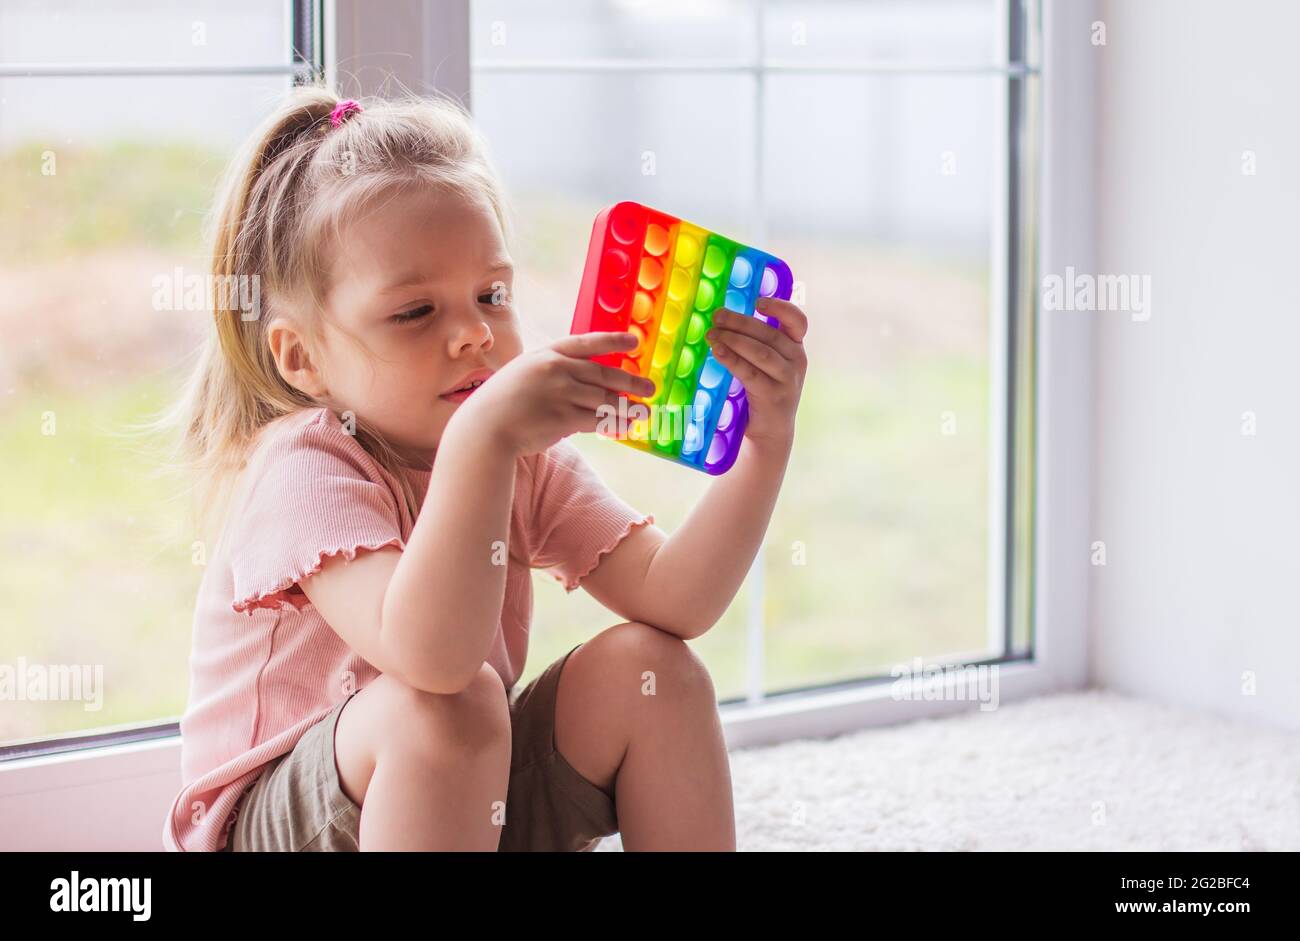 A little blonde girl sits near the window and plays with new trend sensory toy - rainbow pop it. Antistress сolorful toy simple dimple. Squishy soft b Stock Photo